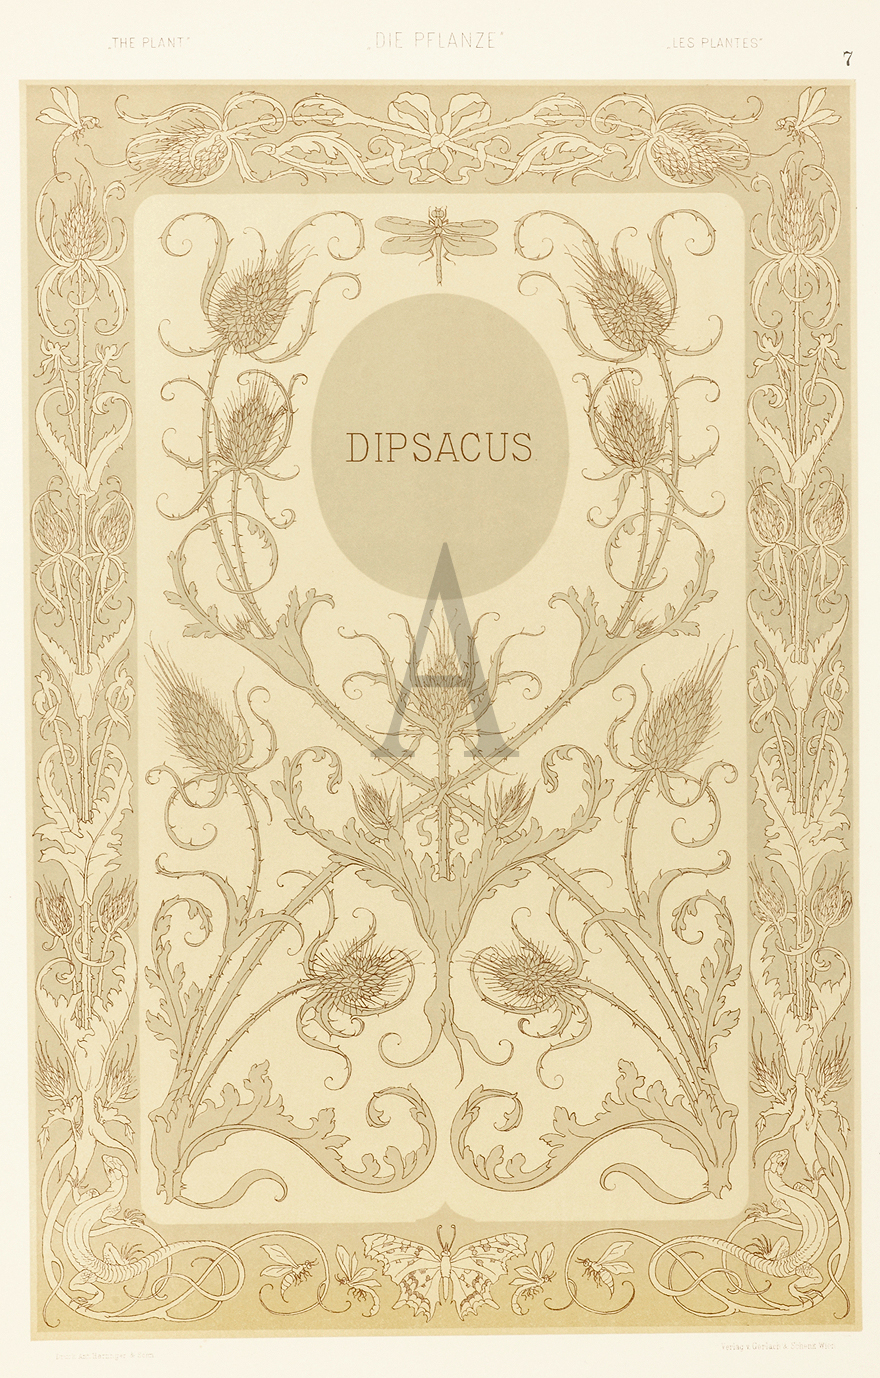 Dipsacus - Antique Print from 1890